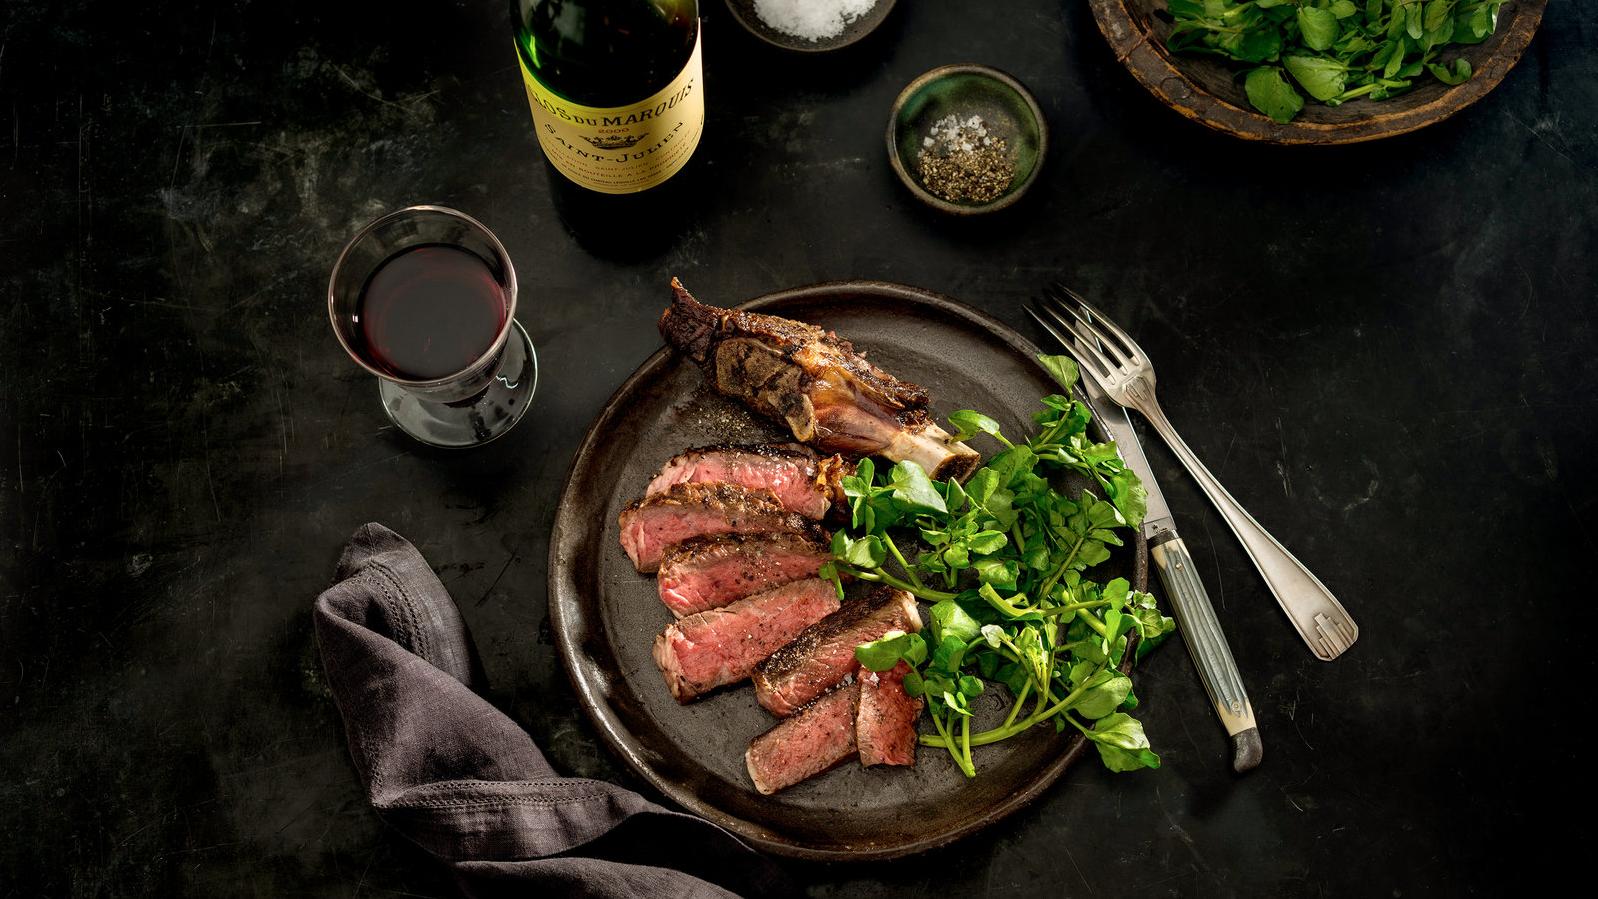  Get ready to savor the deliciousness of steak with curry and red wine sauce!